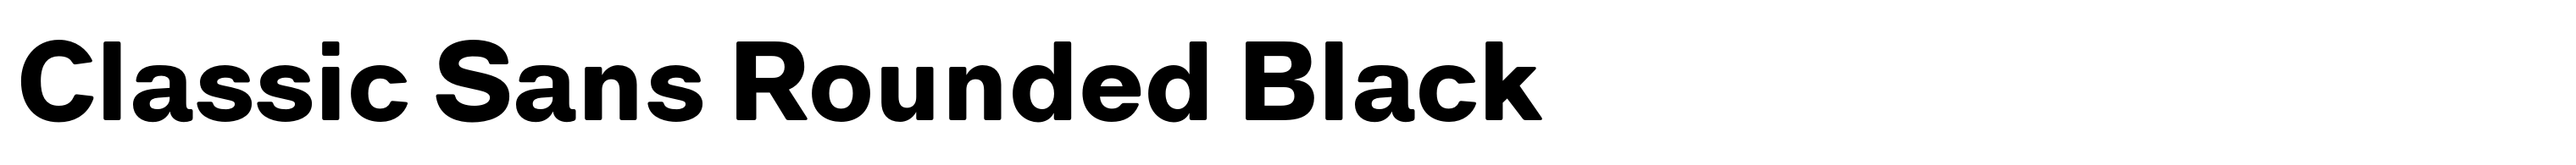 Classic Sans Rounded Black